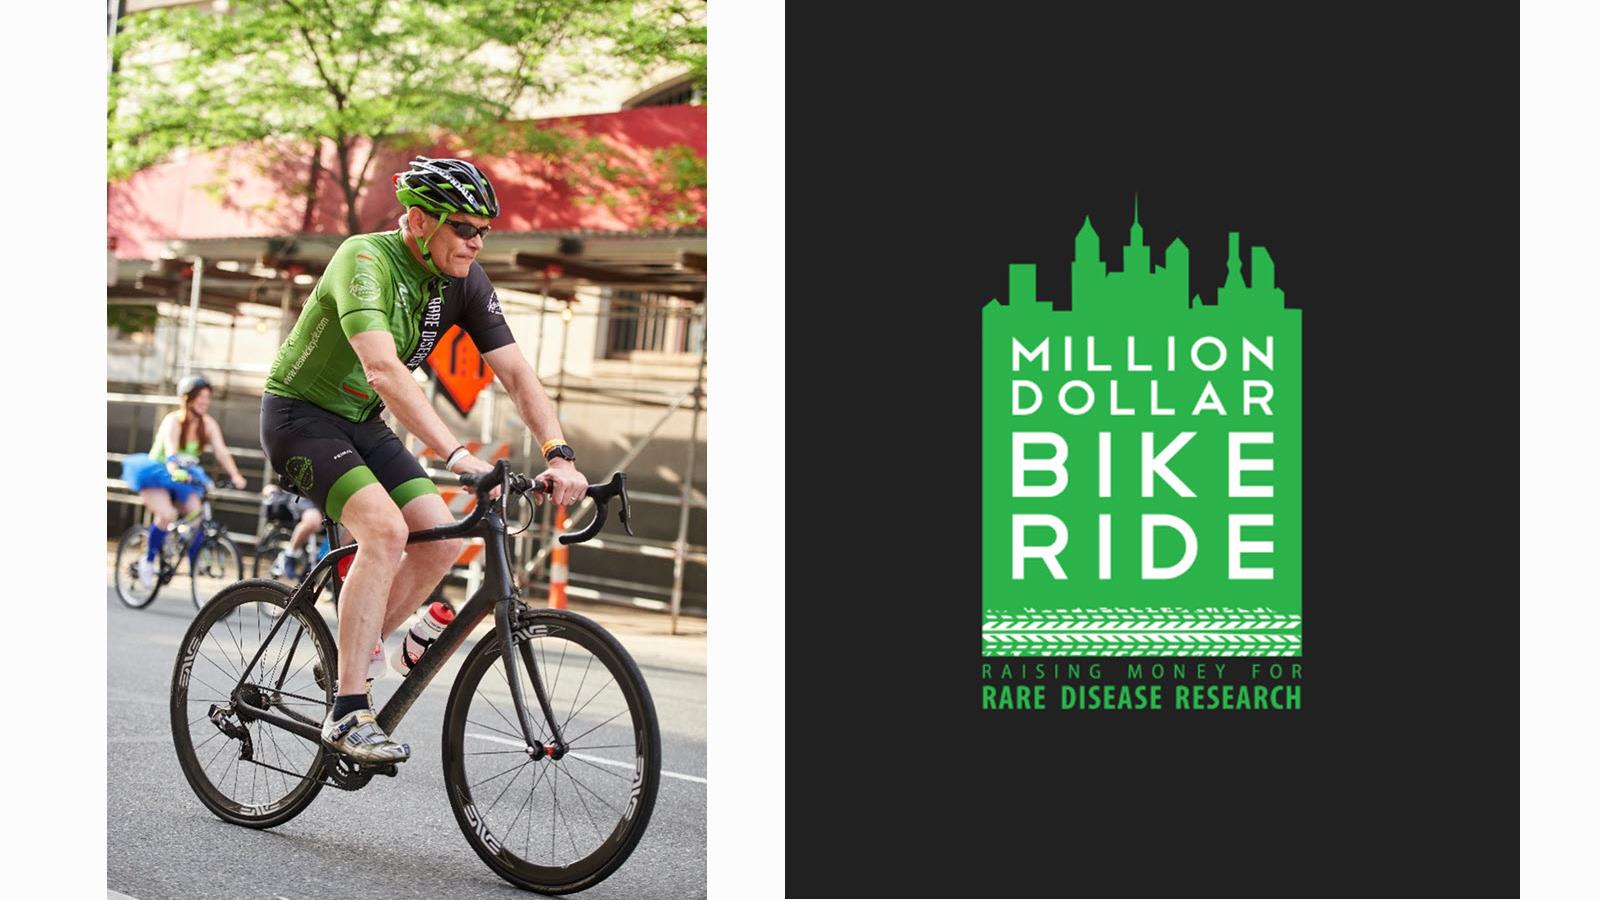 Dr. Jim Wilson and the logo for the Million Dollar Bike Ride